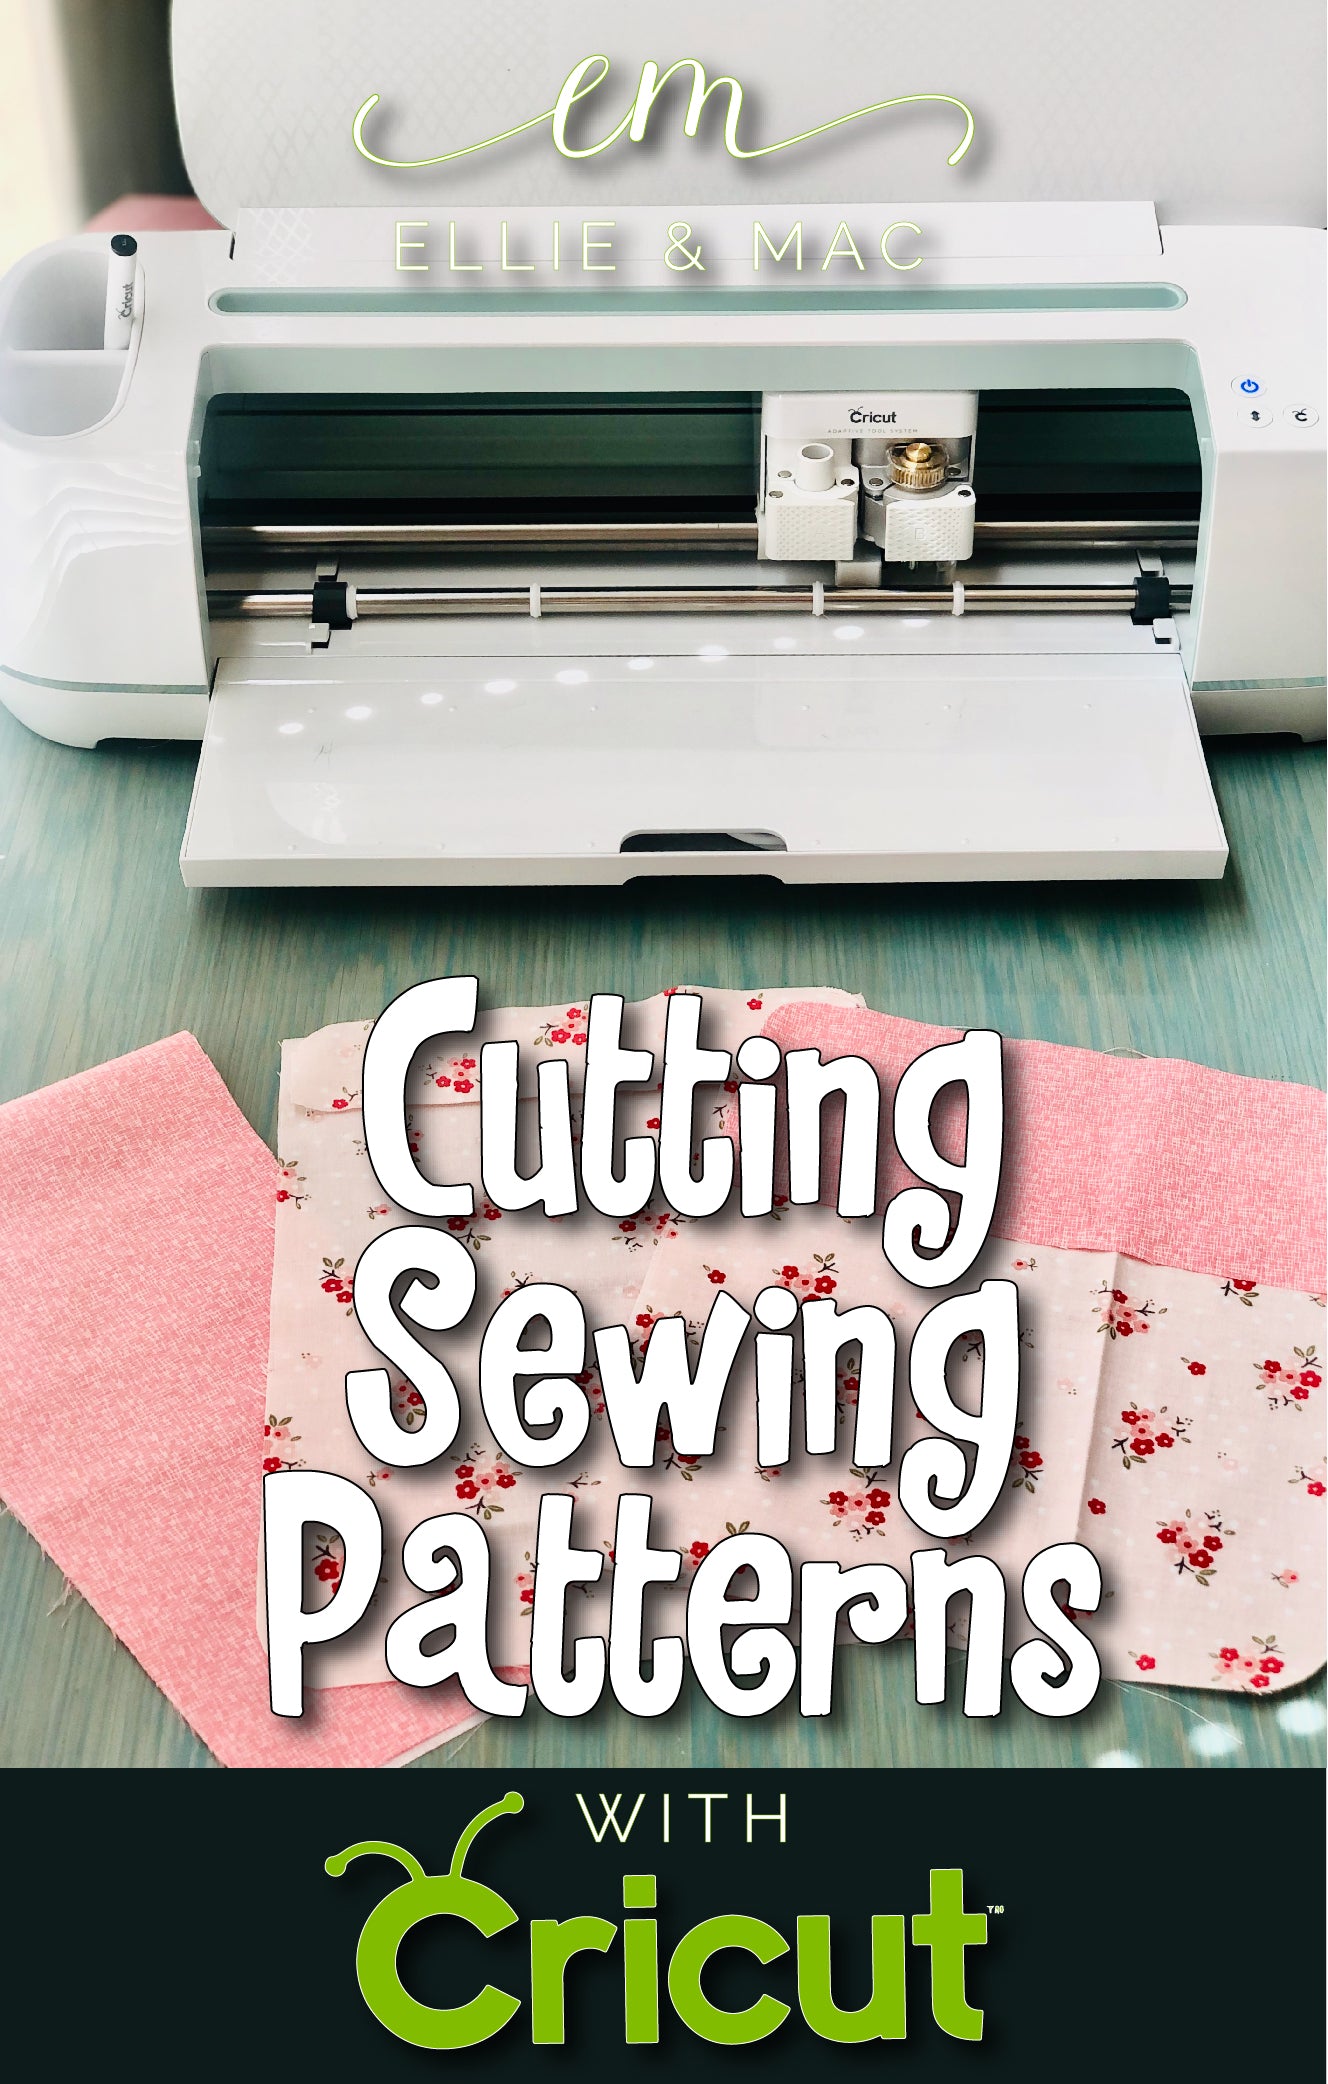 Cutting Sewing Patterns with a Cricut Maker